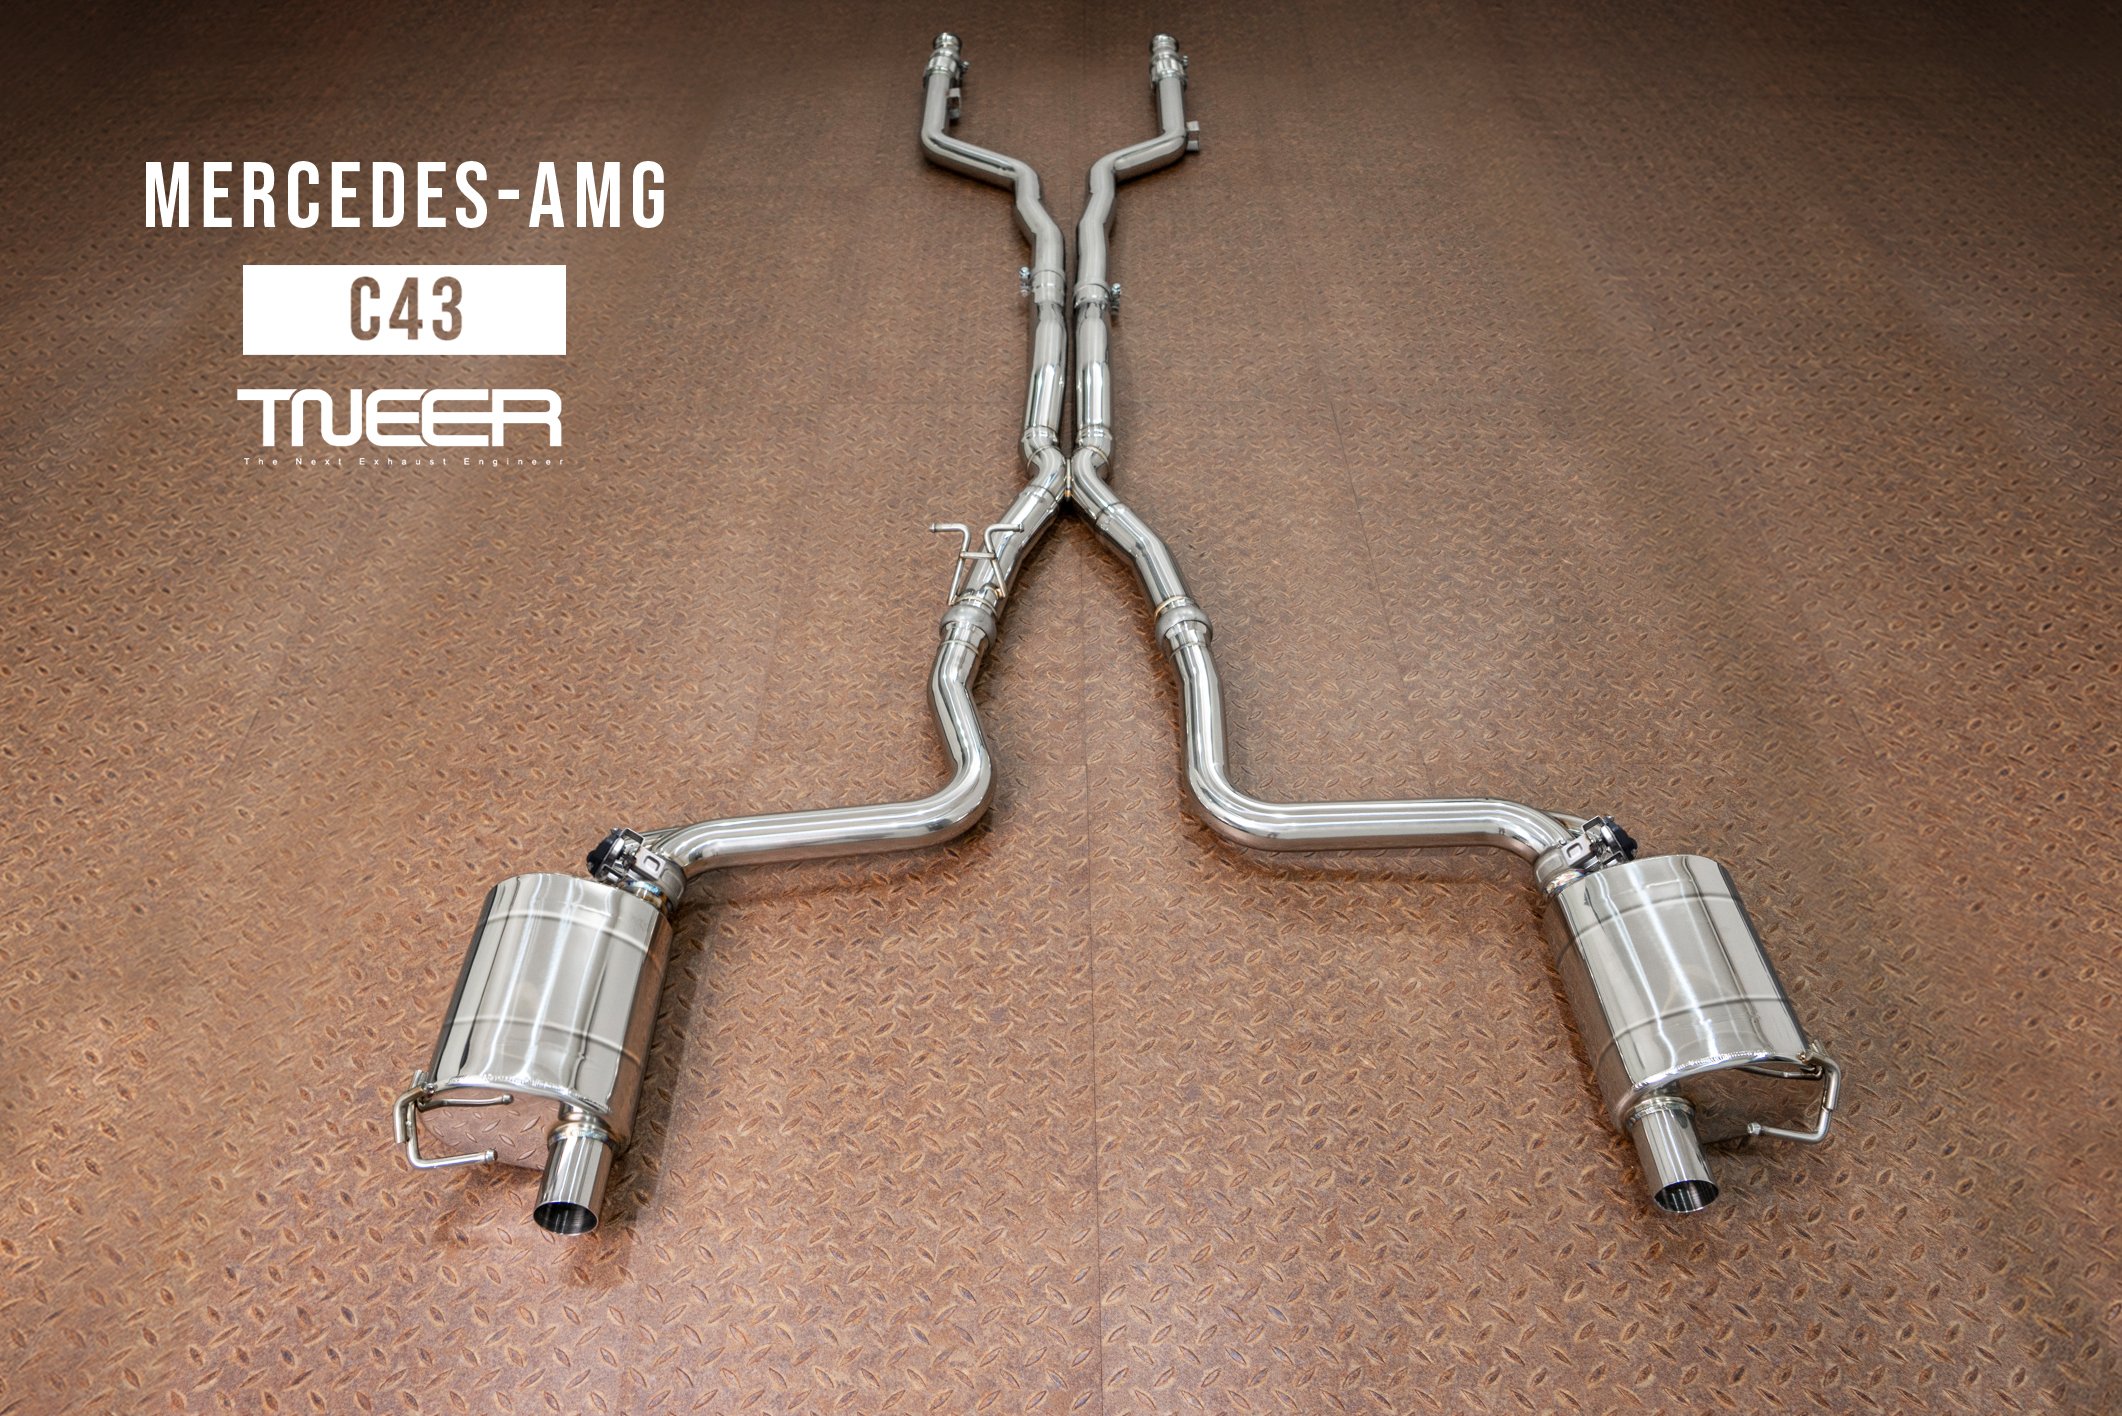 Audi RS5 (B9) TNEER Exhaust System with Dual Silver Tips